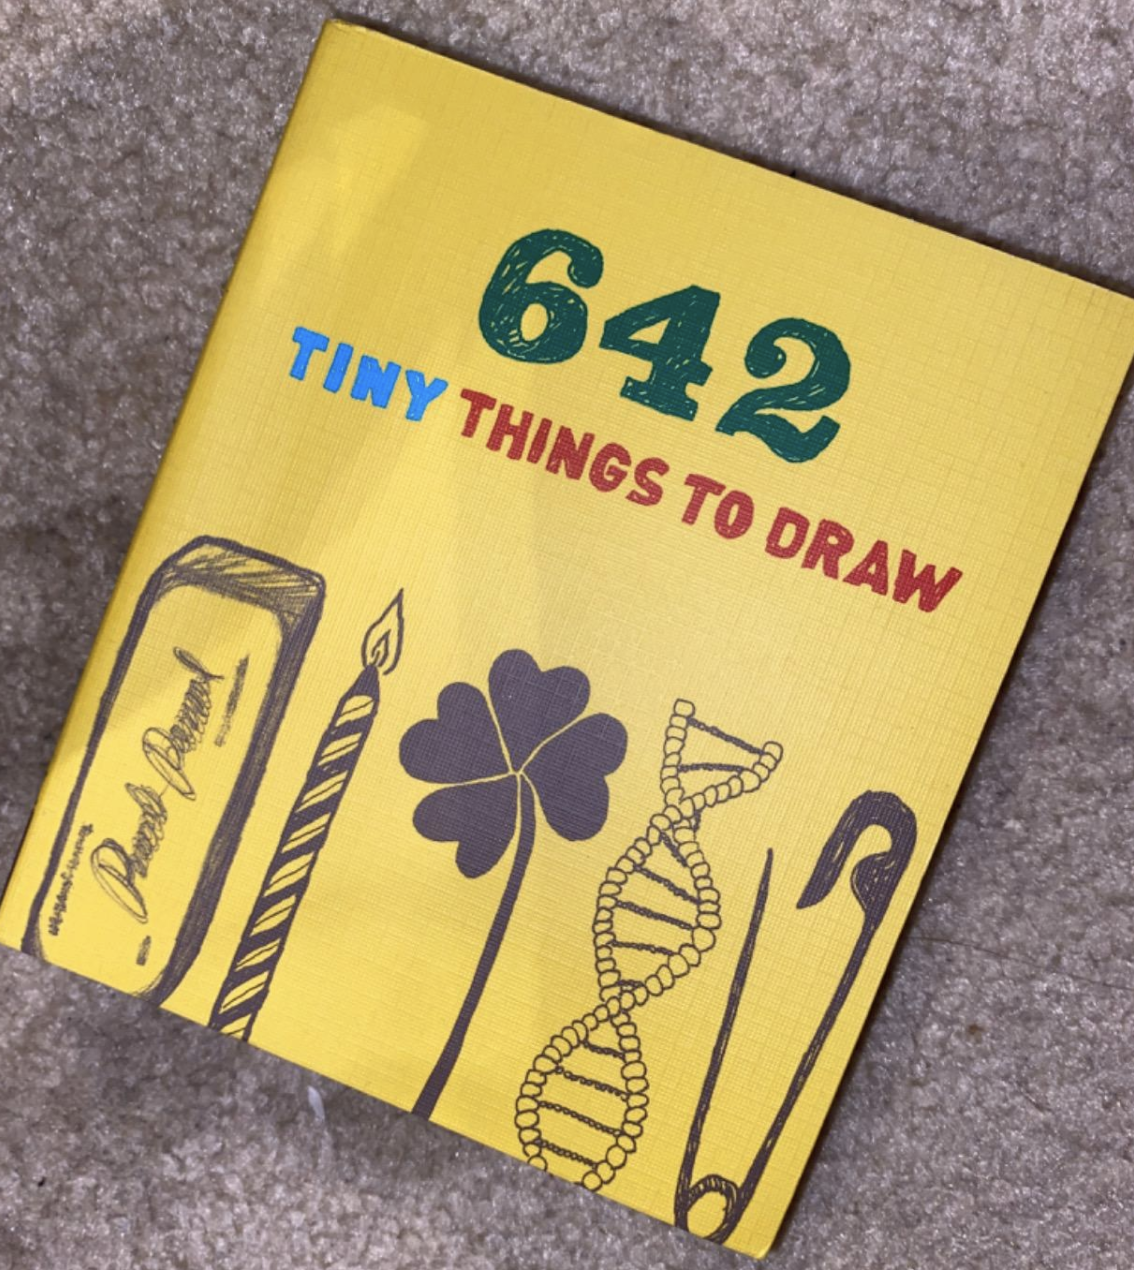 A customer review photo of the 642 Tiny Things To Draw book